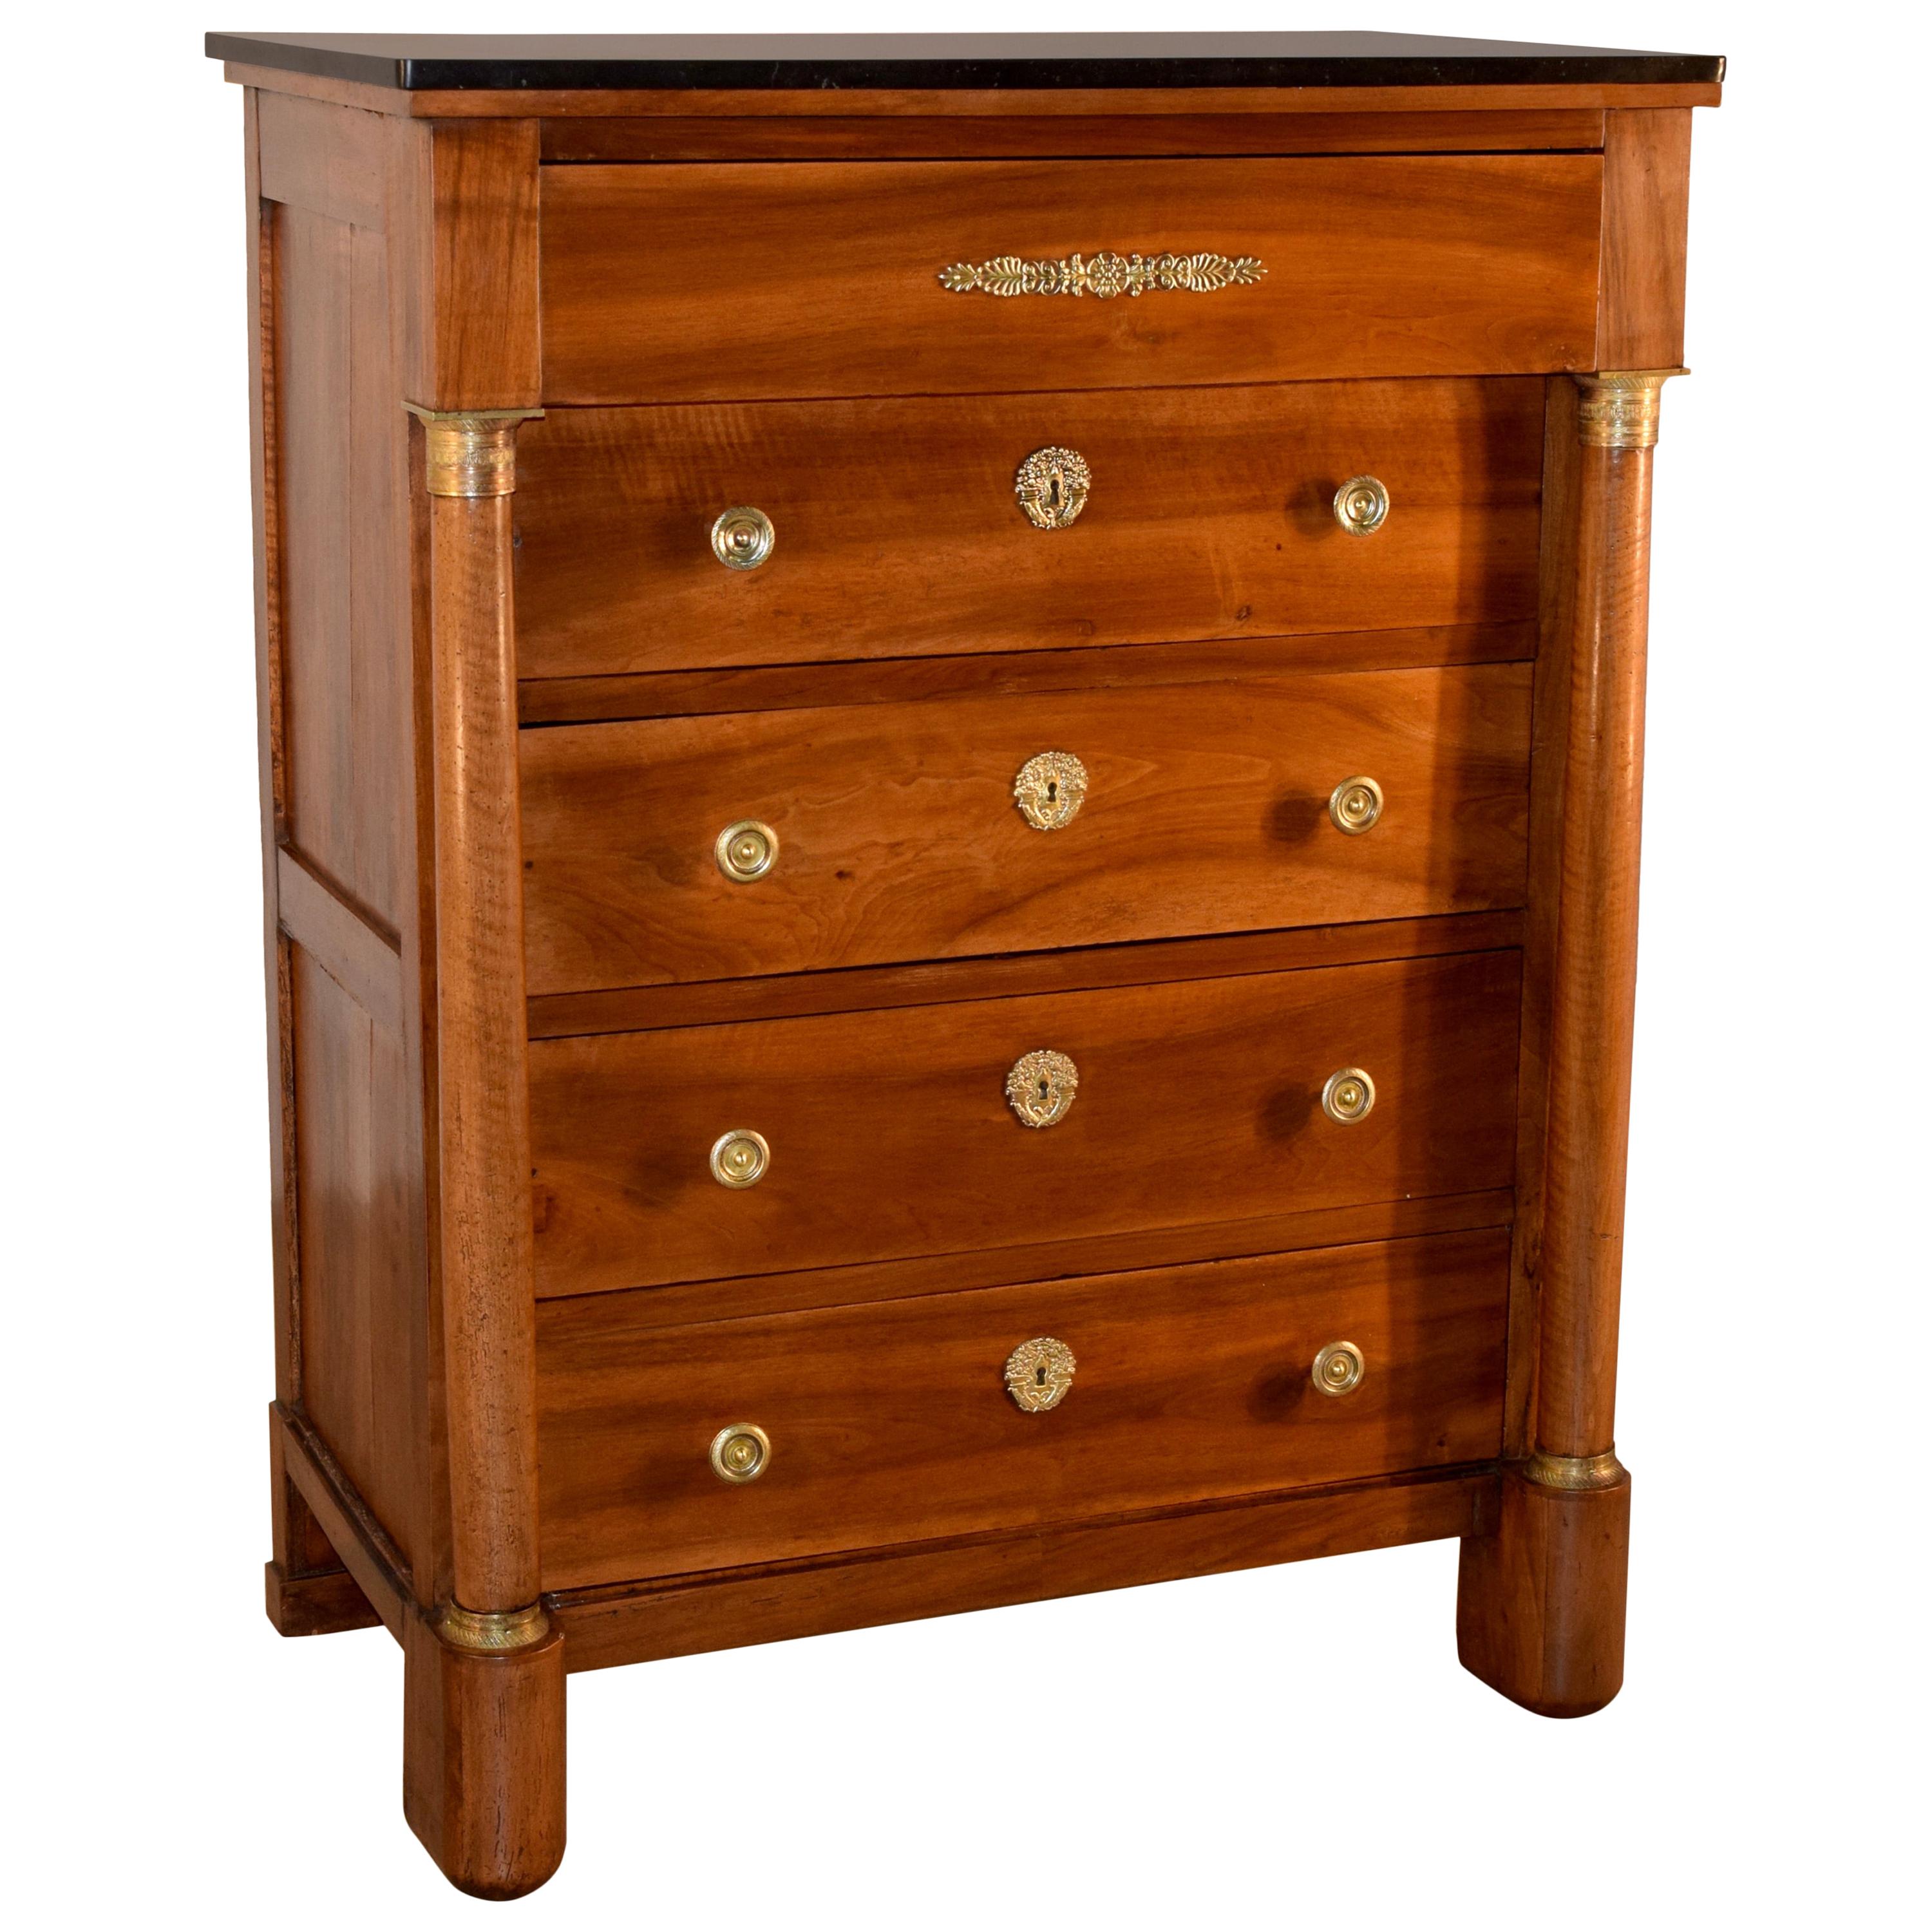 19th Century French Empire Tall Chest of Drawers